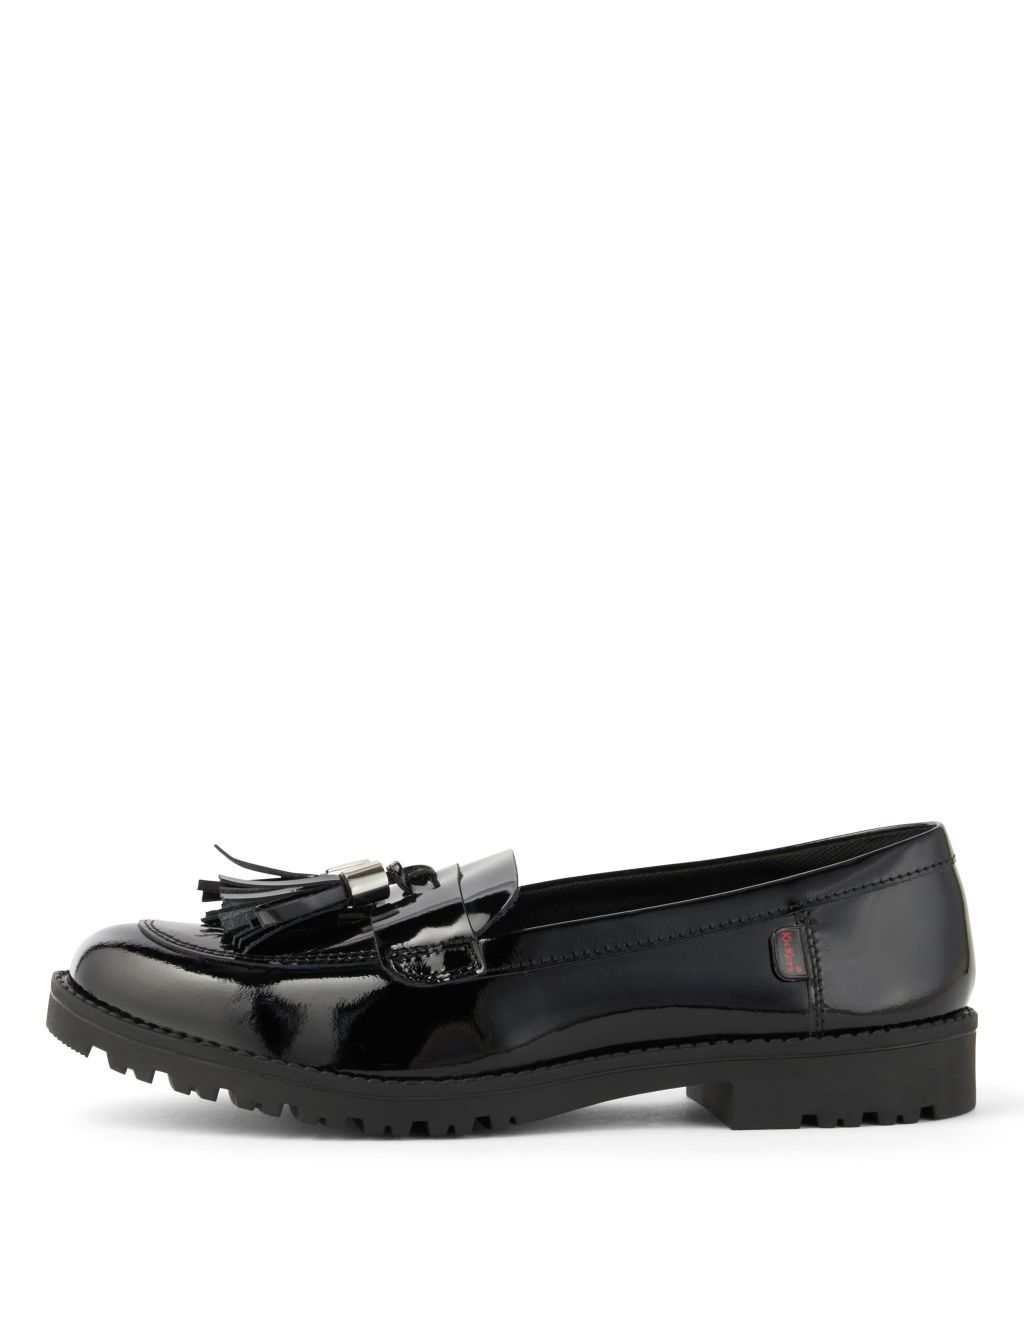 Leather Patent Tassel Loafers | Kickers | M&S